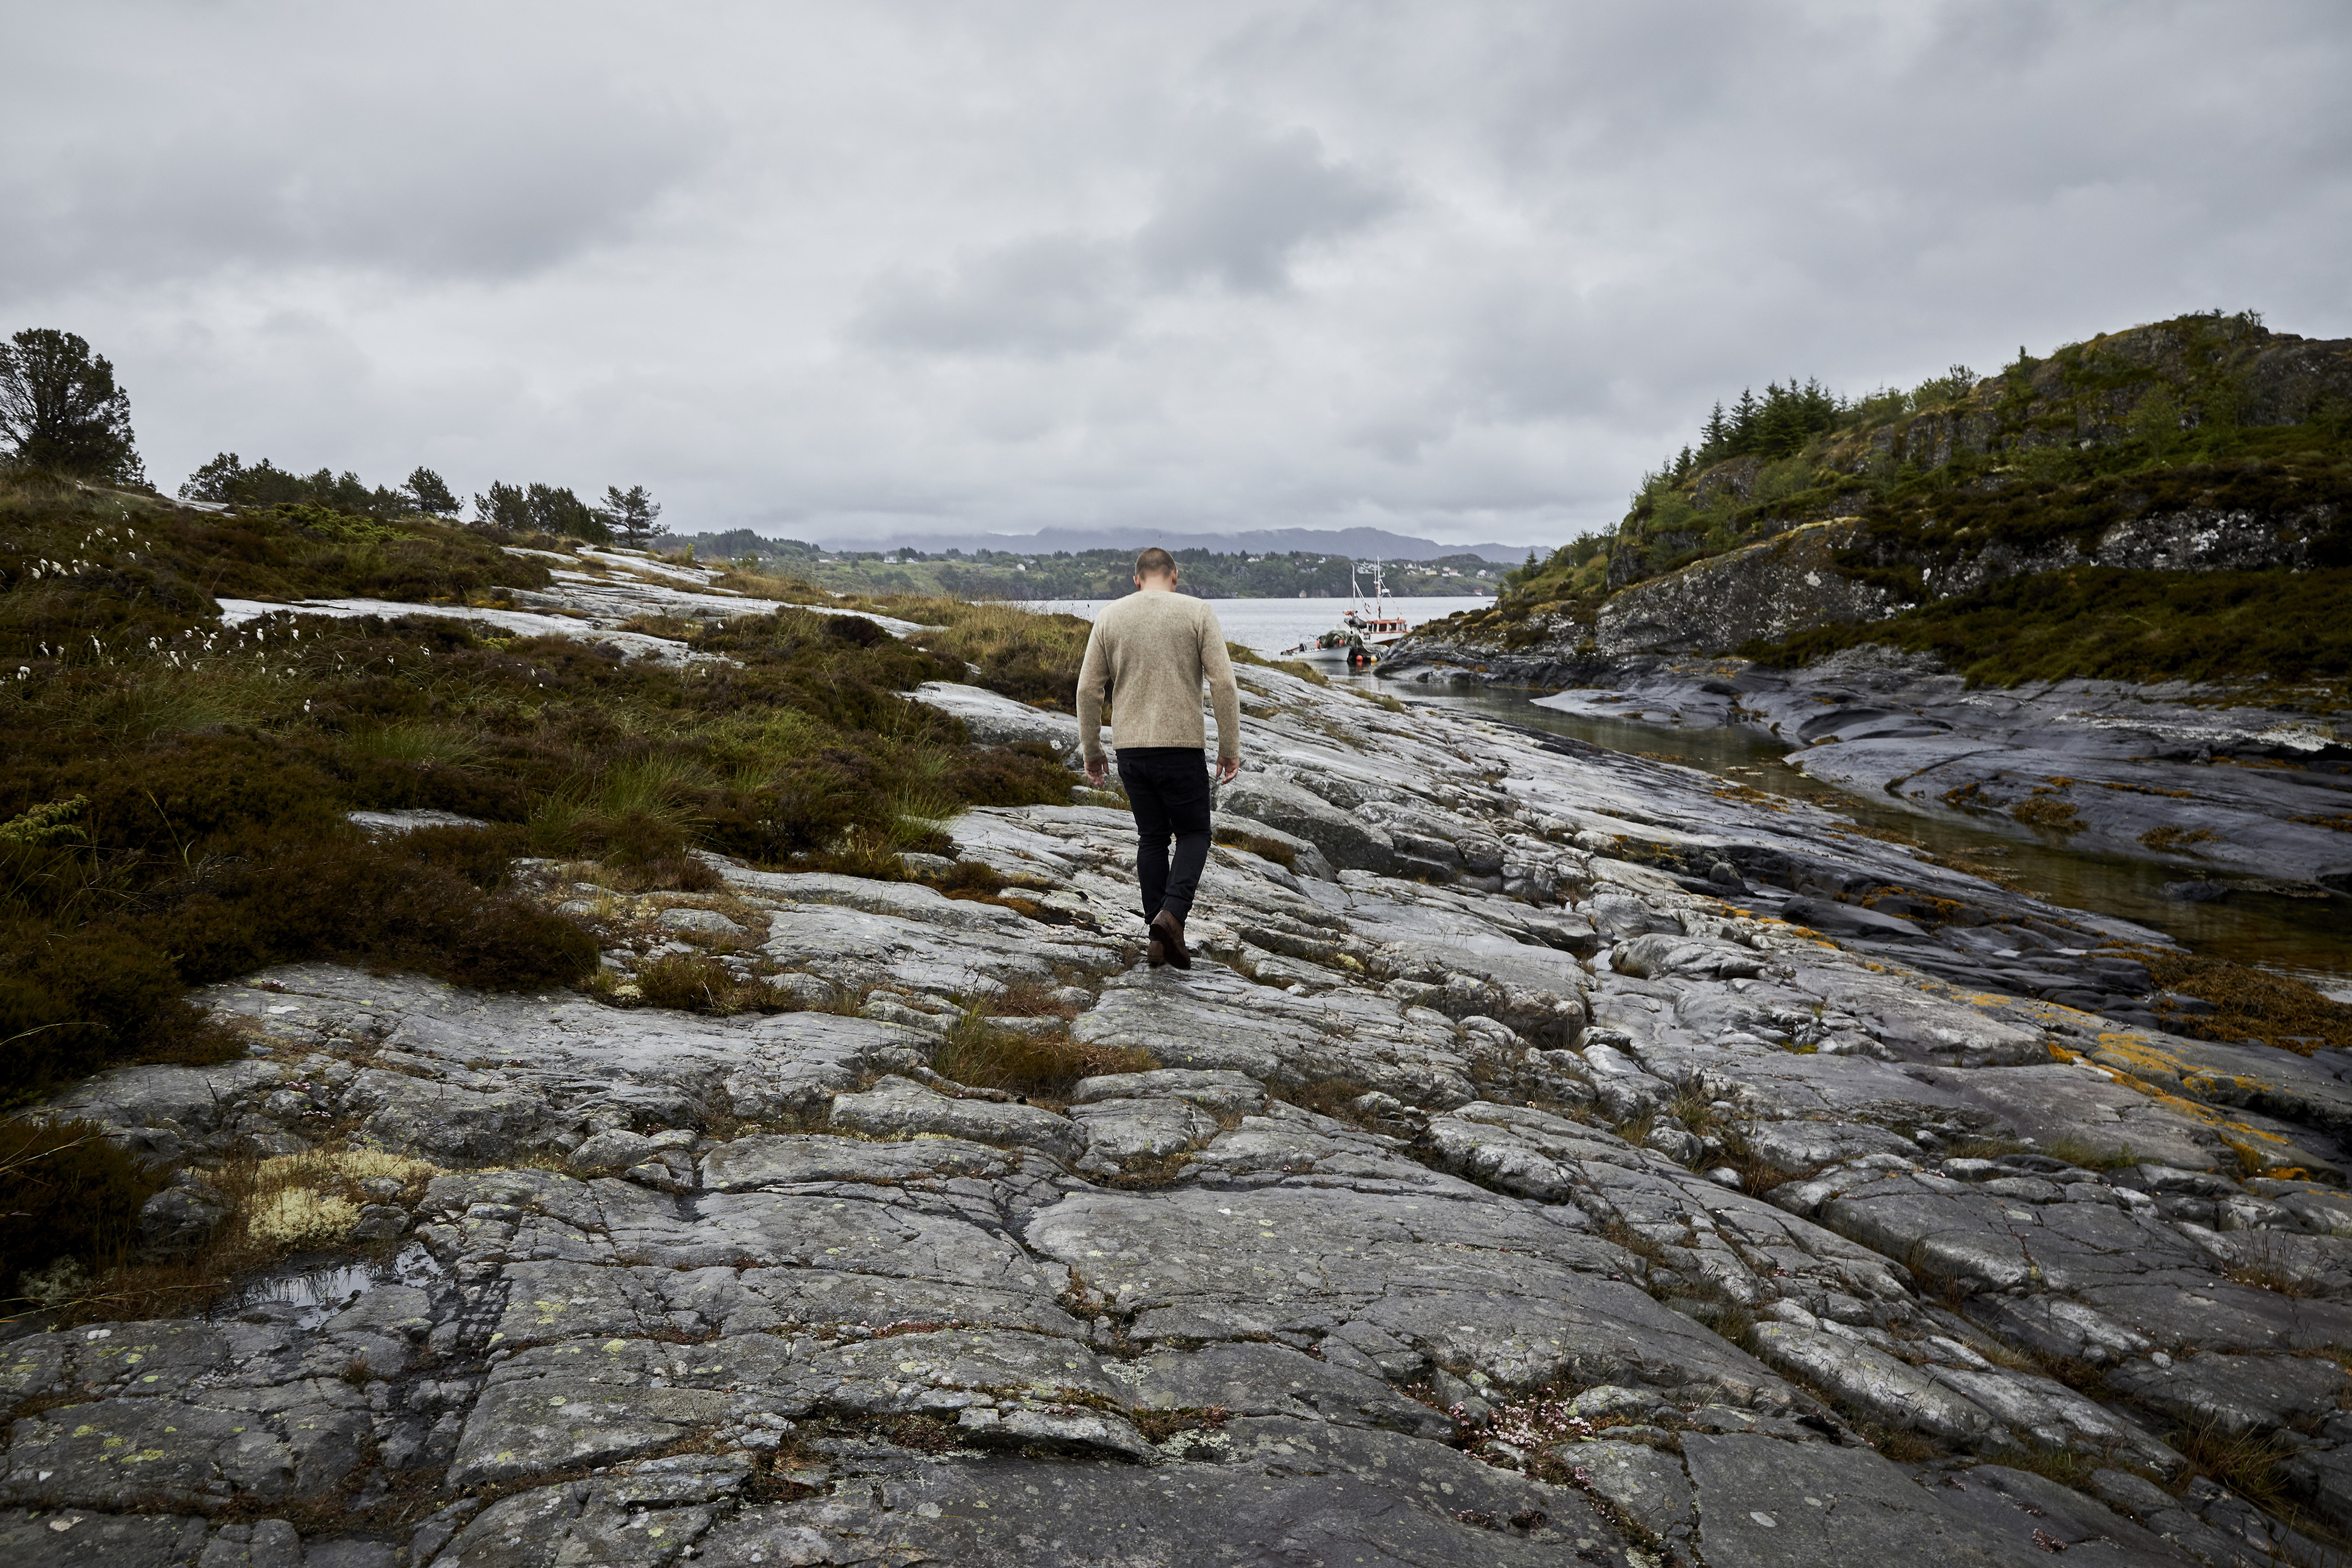 Lyseverket owner and chef Christopher Haatuft, walks across a rocky landscape on Sotra, an island in the North Atlantic just west of Bergen, Norway, July, 2017. New Nordic chefs are guided by solemn manifestoes about nature and culture, and often restrict themselves to Scandinavian ingredients. Haatuft, who is the opposite of solemn, coined a new term for the food at his restaurant: neo-fjordic. (David B. Torch/The New York Times)